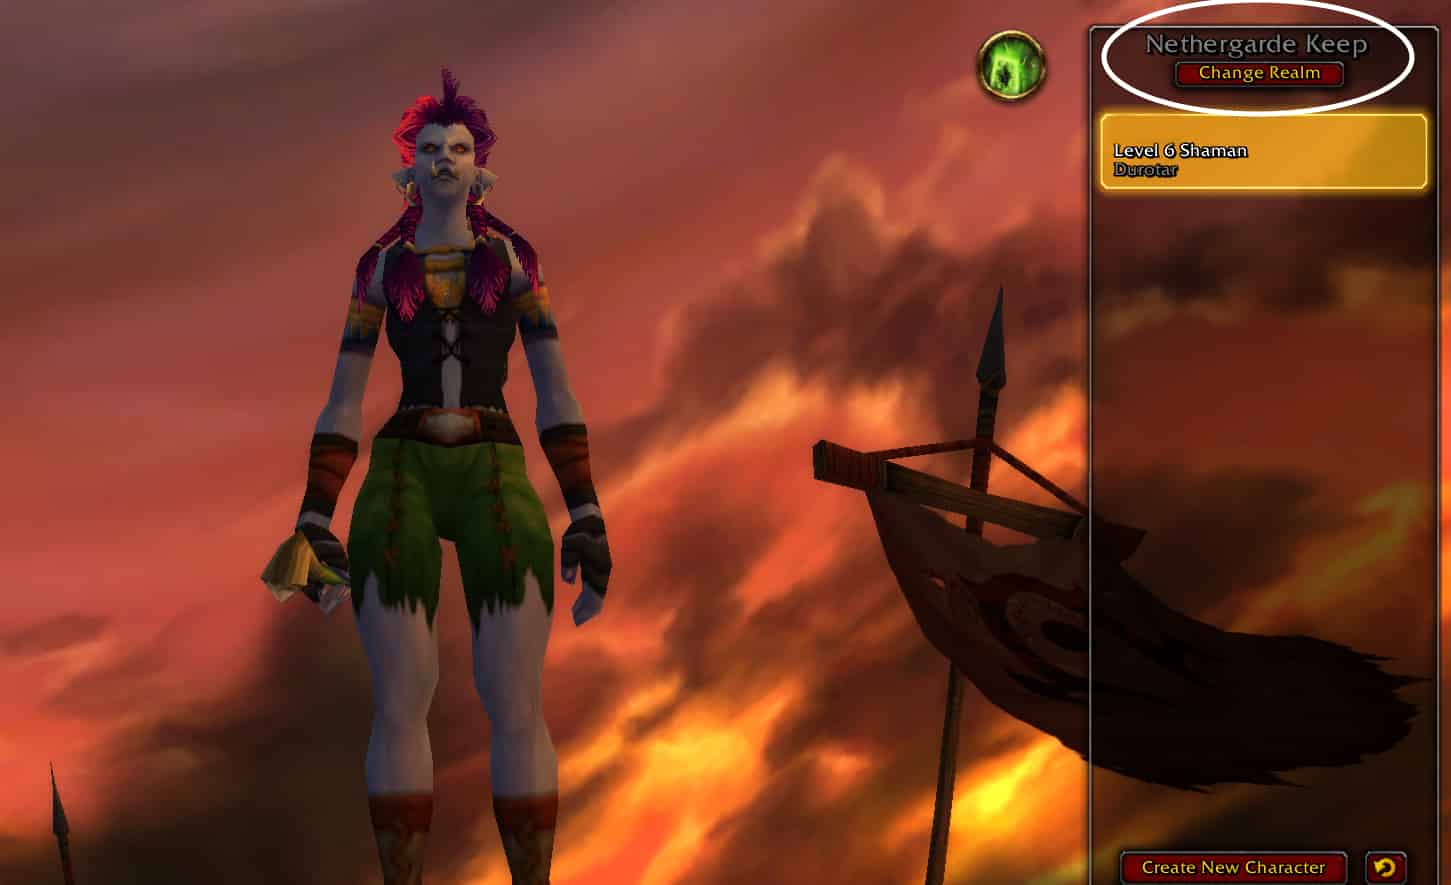 A Troll shaman in the WoW Classic character select screen, showing the server button